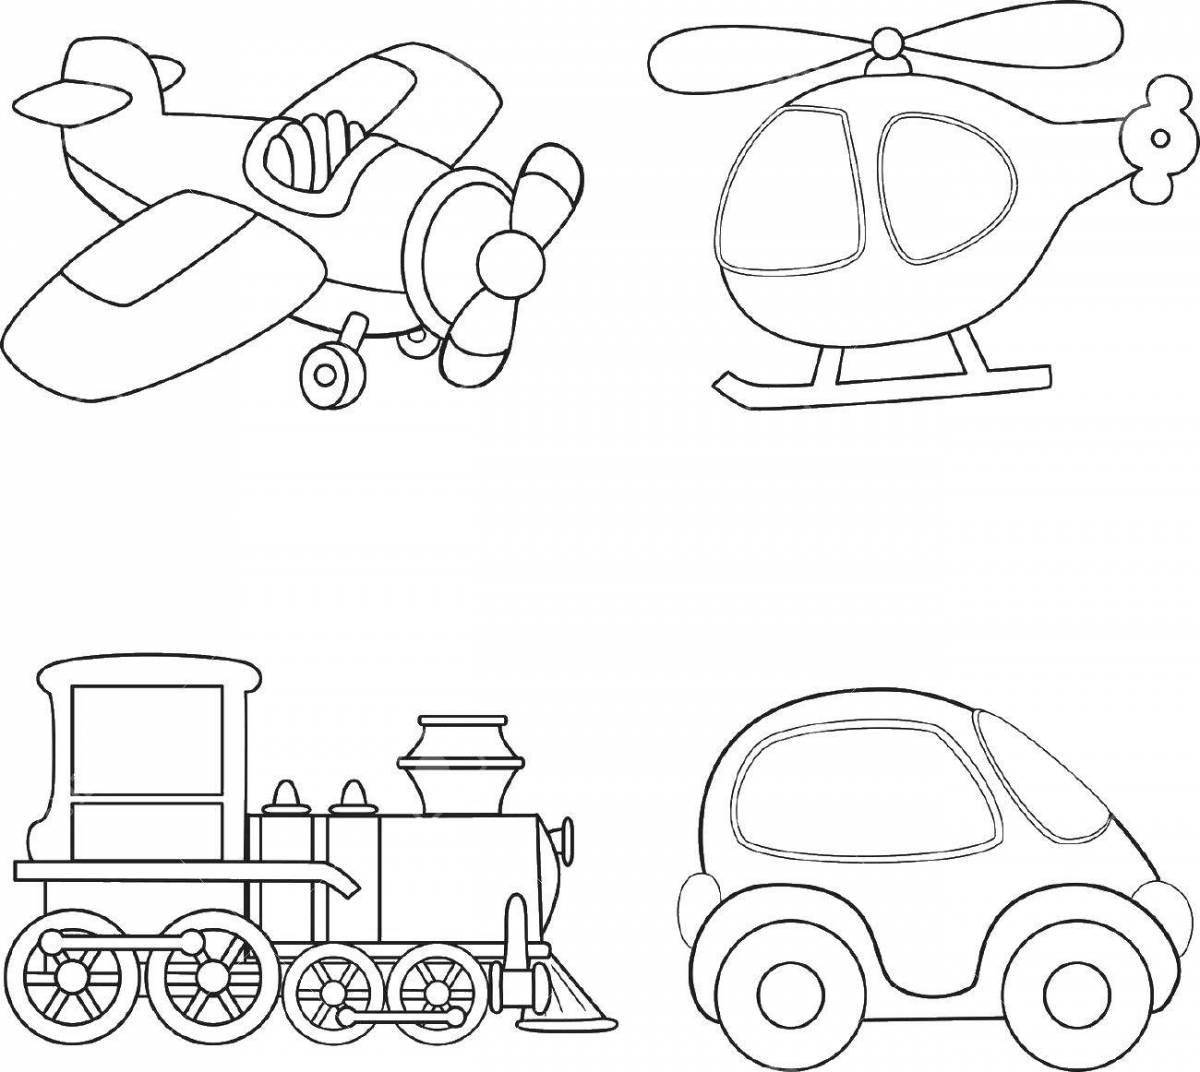 Entertaining coloring of transport of the middle group